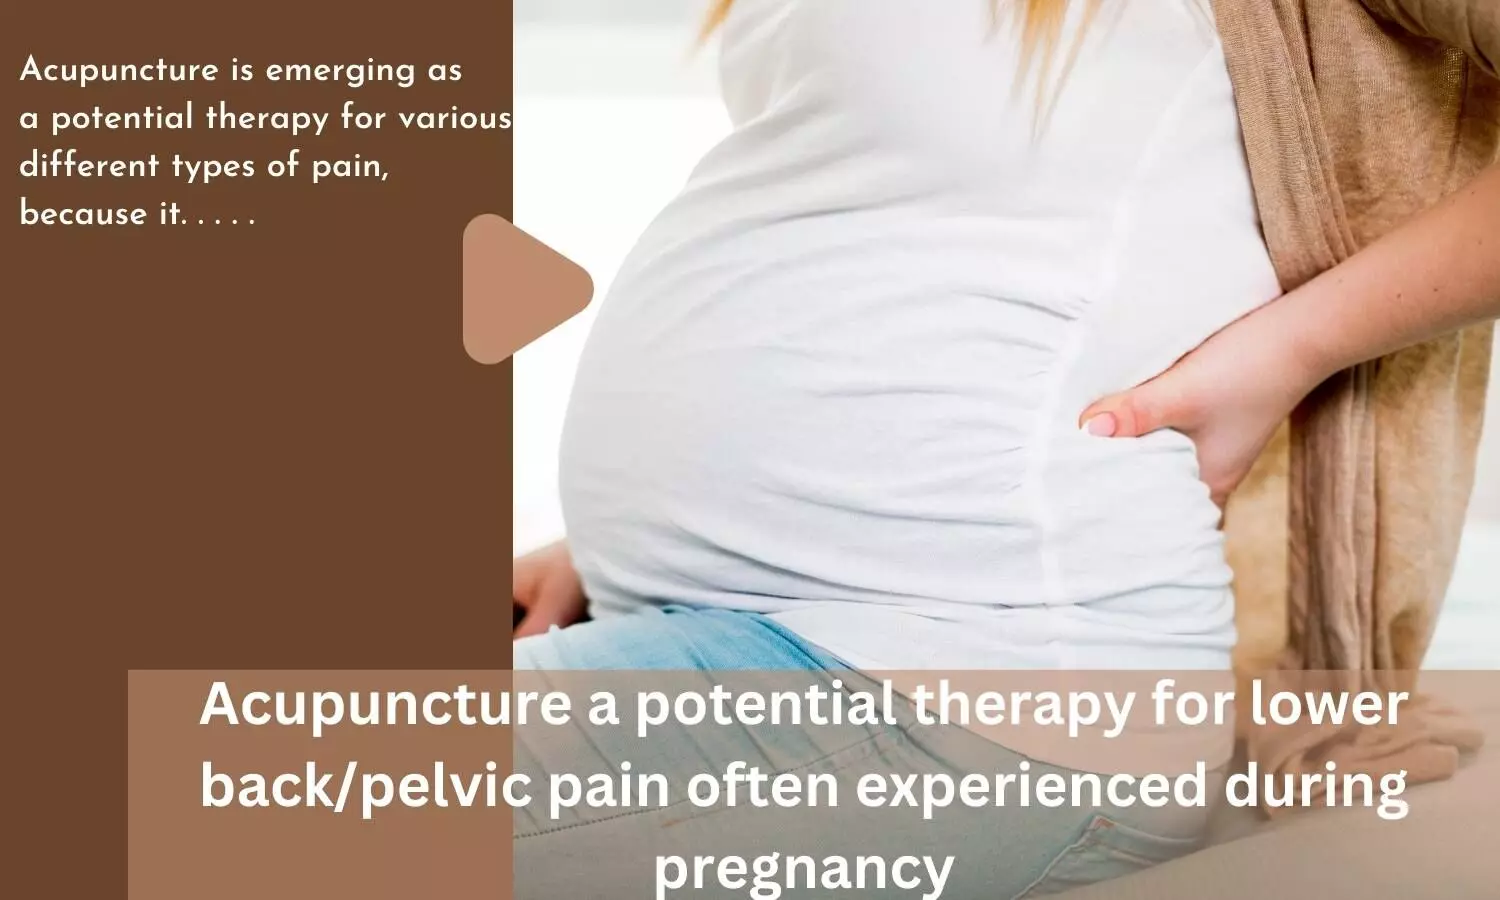 Acupuncture a potential therapy for lower back/pelvic pain often experienced during pregnancy